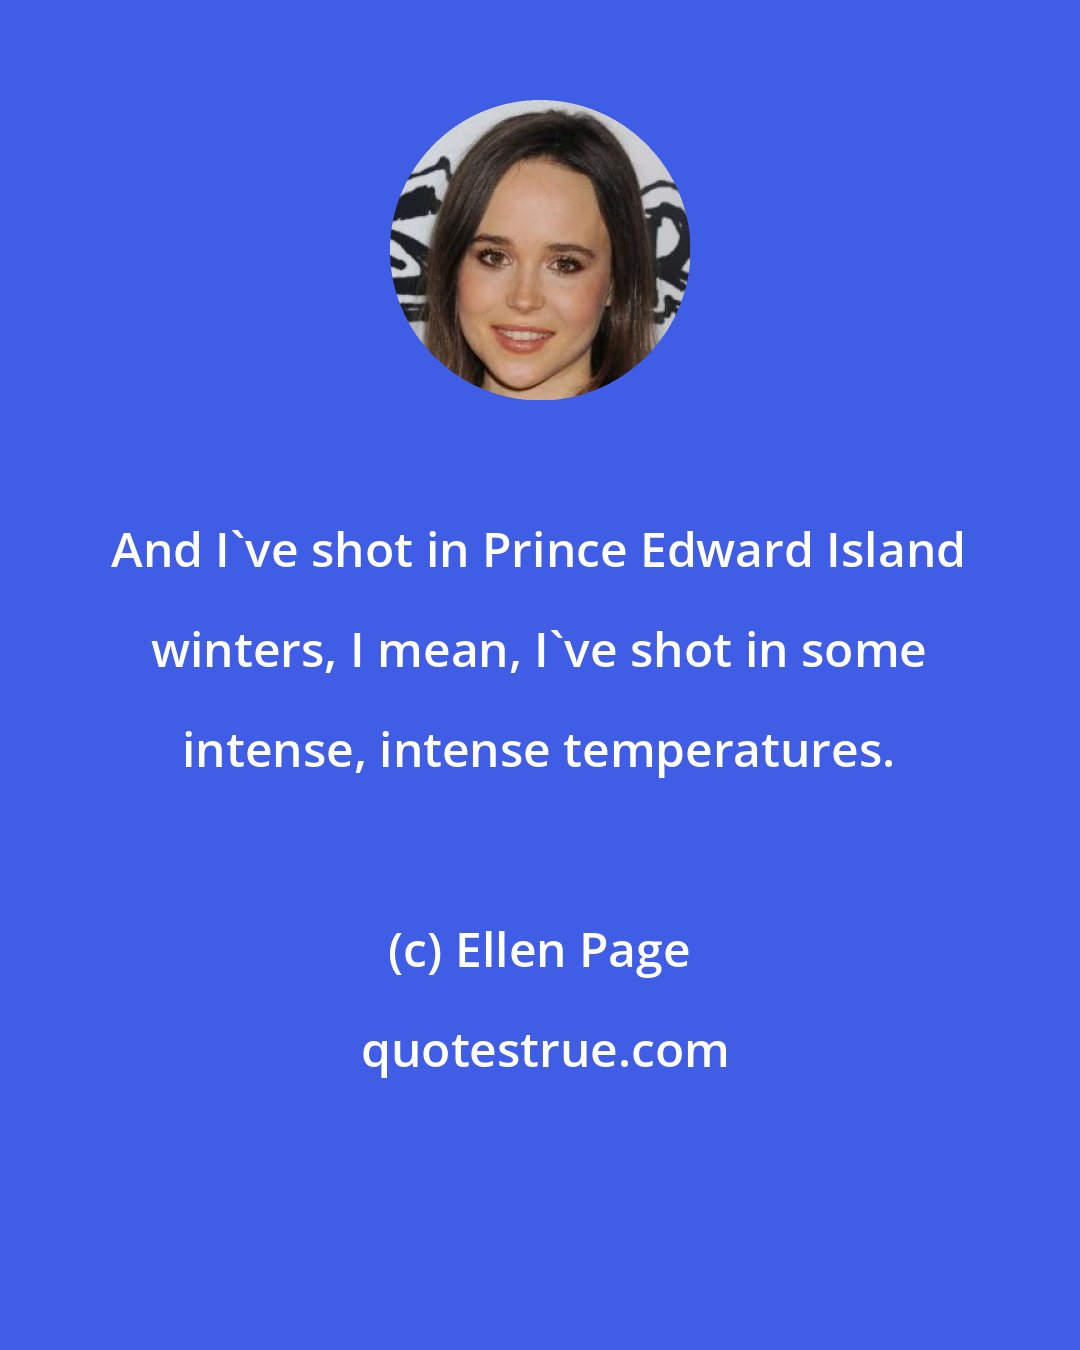 Ellen Page: And I've shot in Prince Edward Island winters, I mean, I've shot in some intense, intense temperatures.